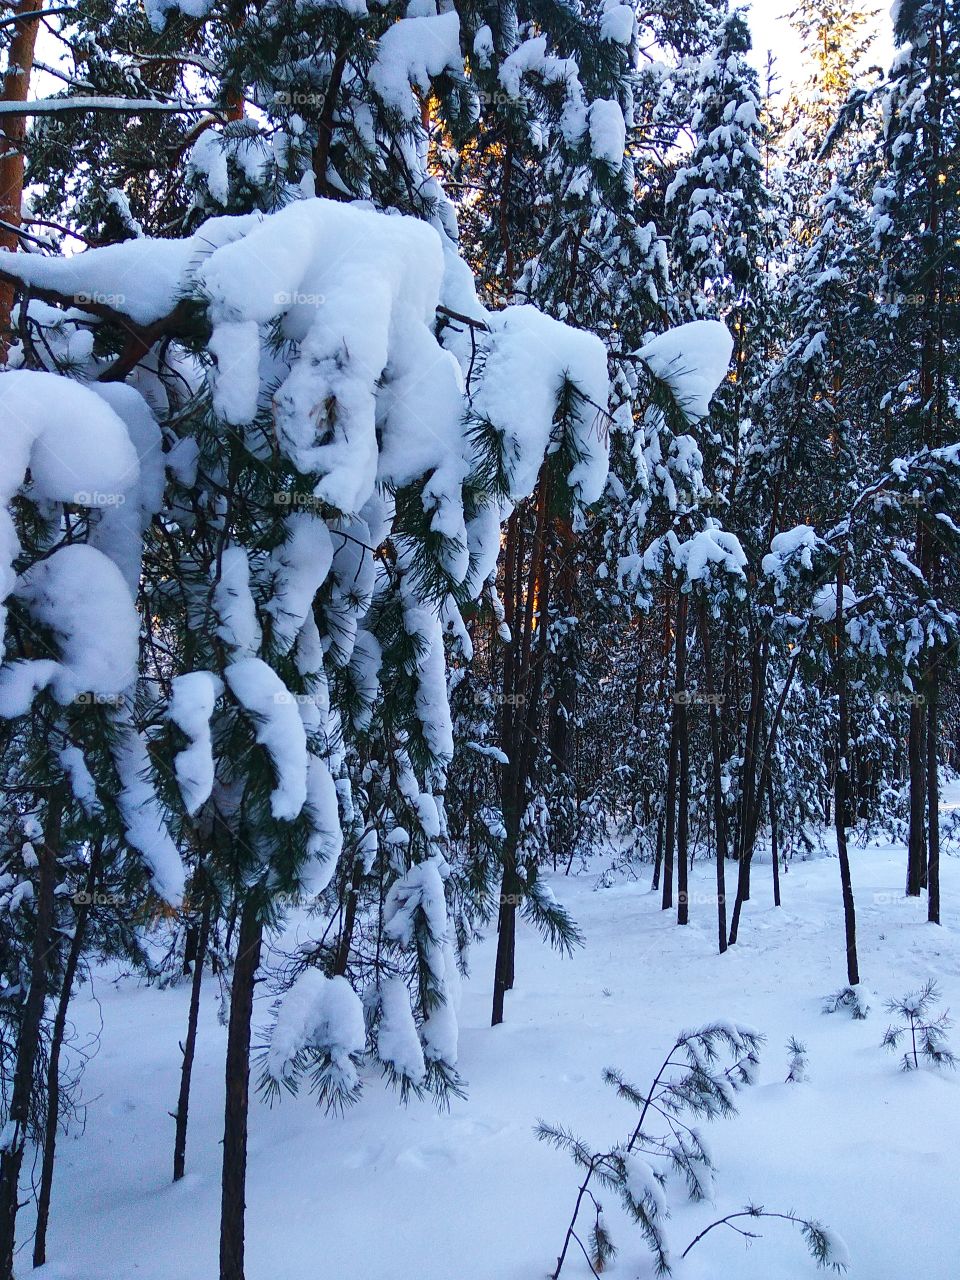 Snow covering pine trees in winter woodland